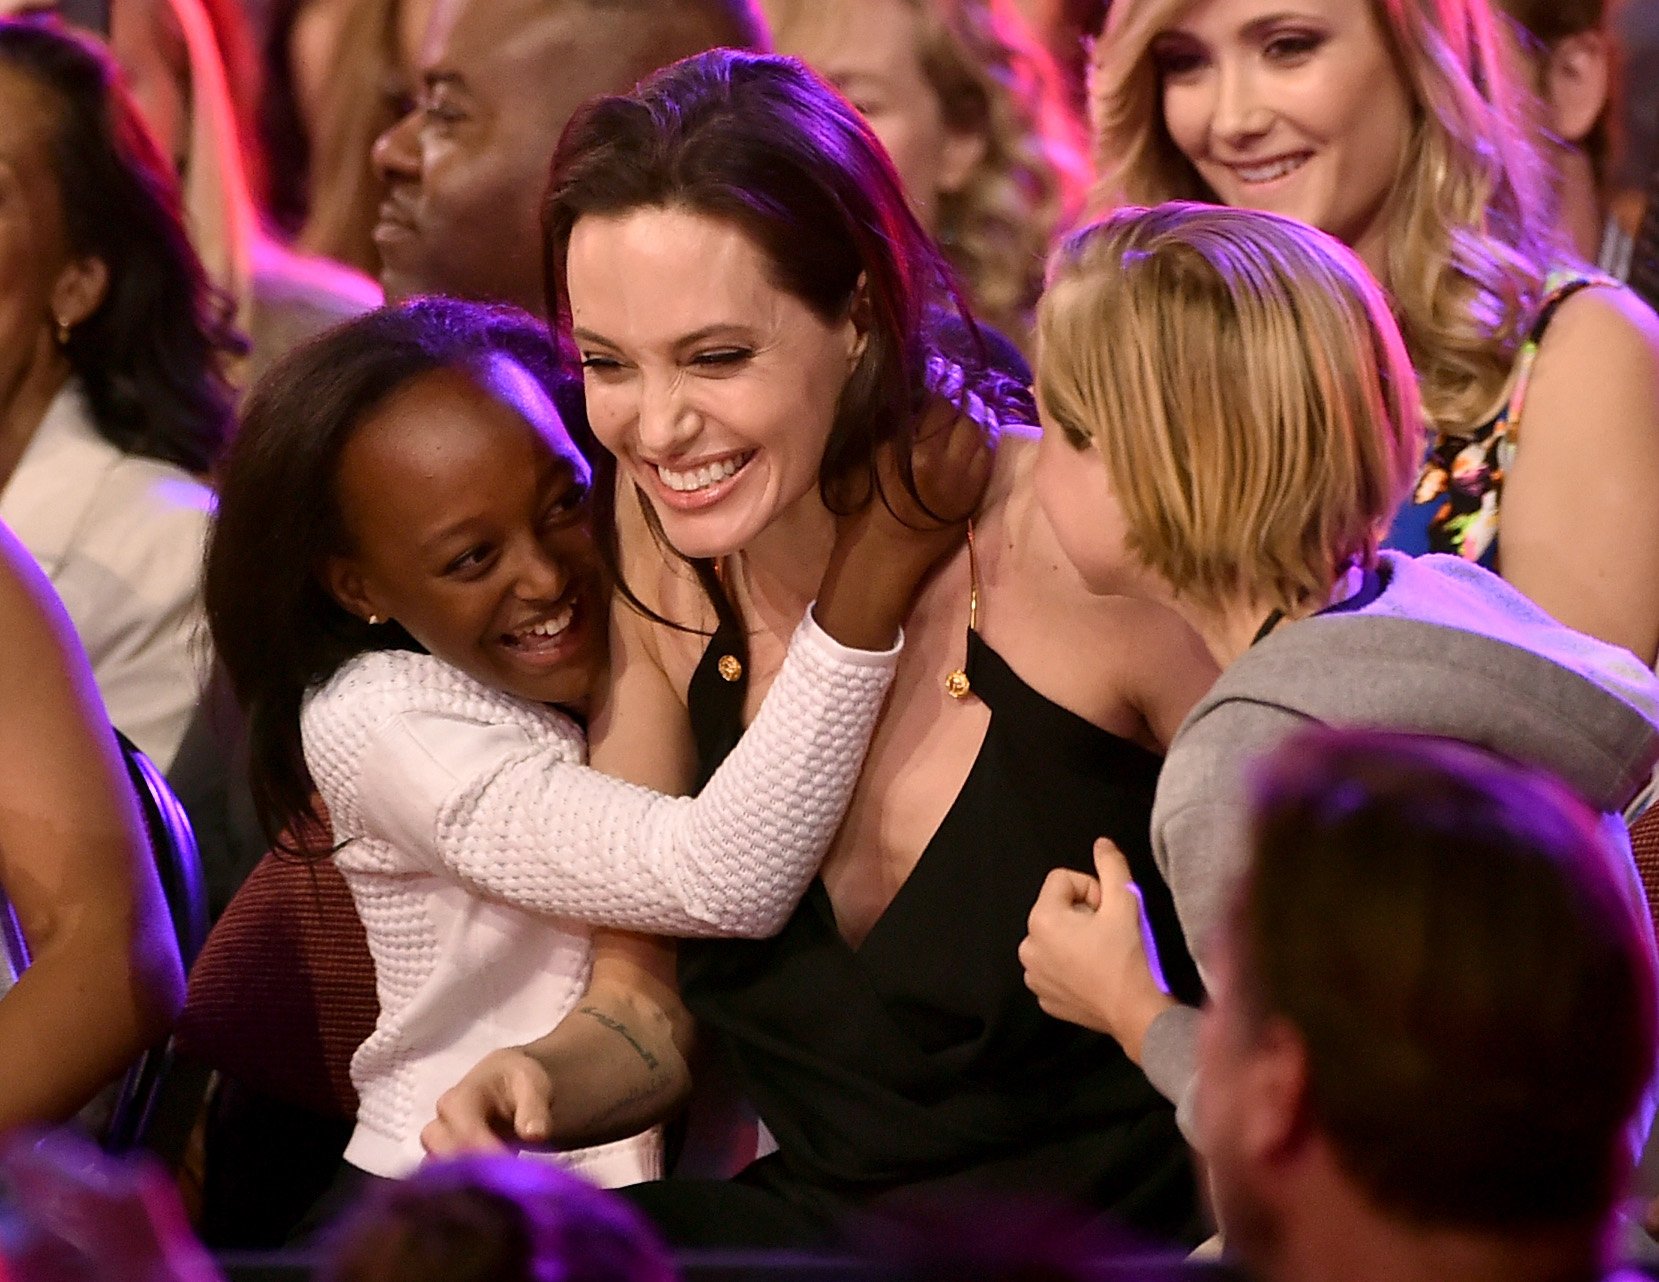 Actress Angelina Jolie pictured with her daughters Zahara Jolie-Pitt and Shiloh Jolie-Pitt during Nickelodeon's 28th Annual Kids' Choice Awards at The Forum on March 28, 2015 in Inglewood, California ┃Source: Getty Images